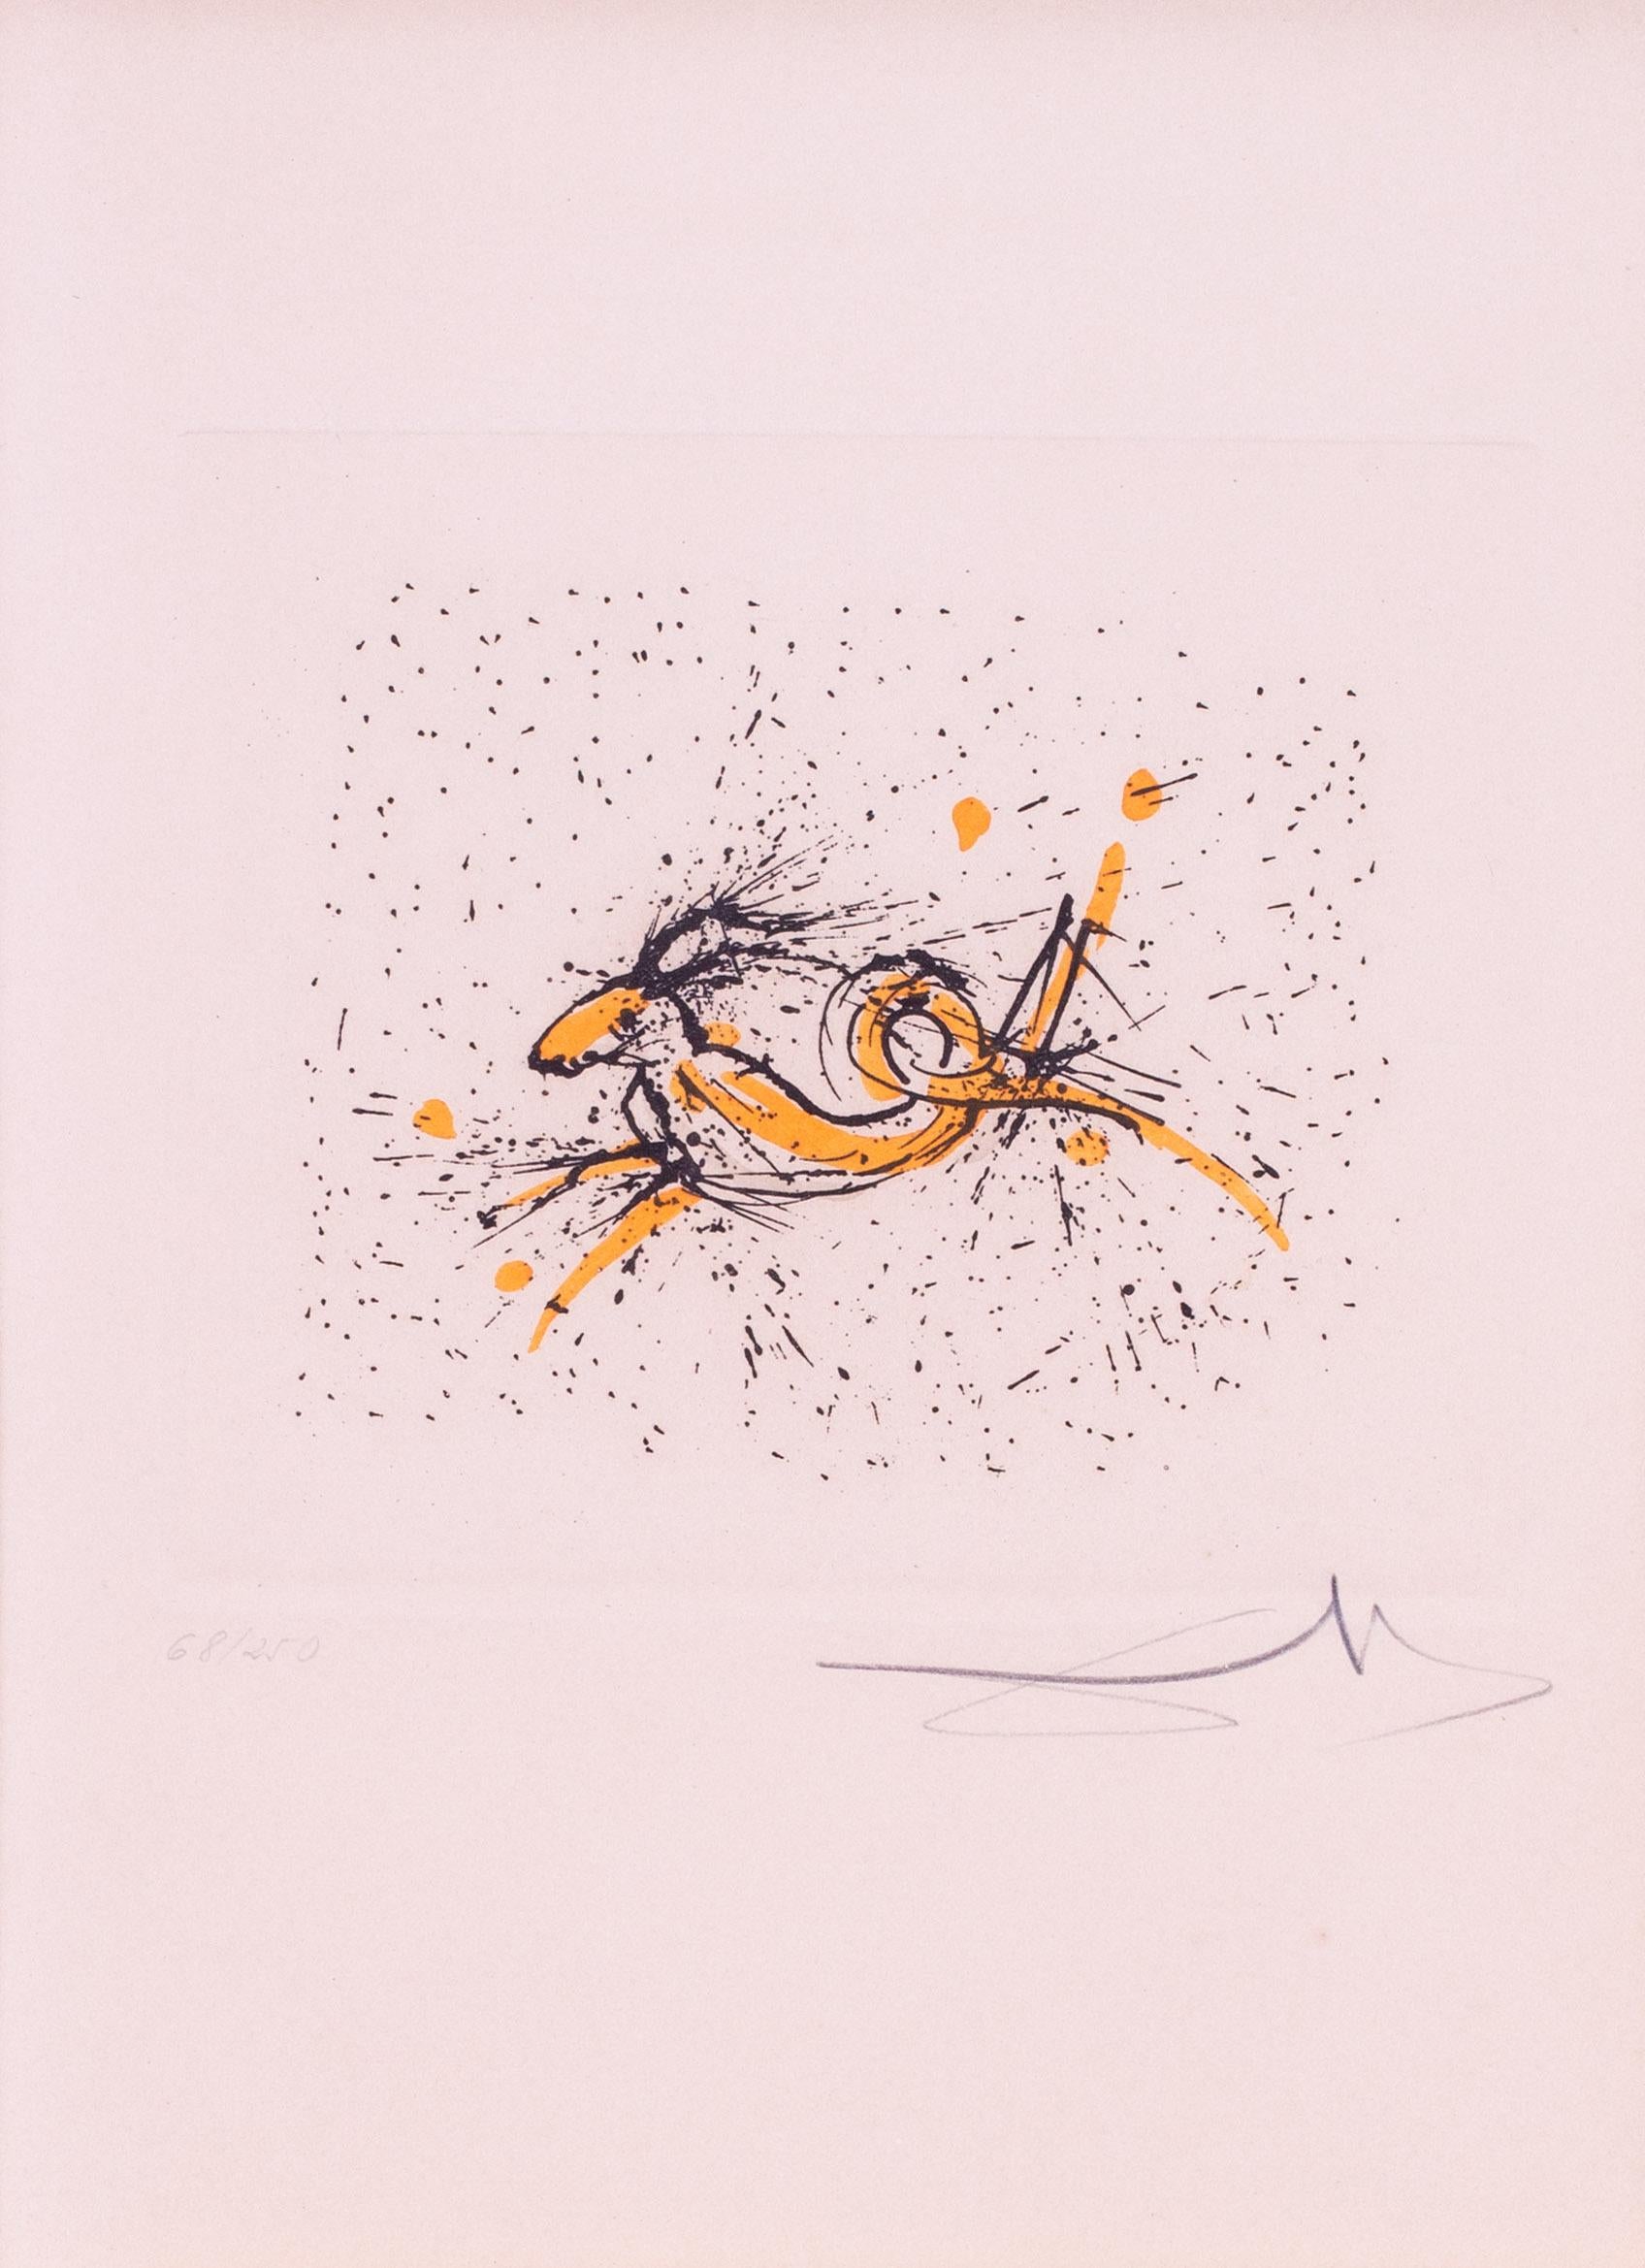 Salvador Dali signed lithograph 'Capricorn from the Zodiac II', 1975, `68/250 - Print by Salvador Dalí